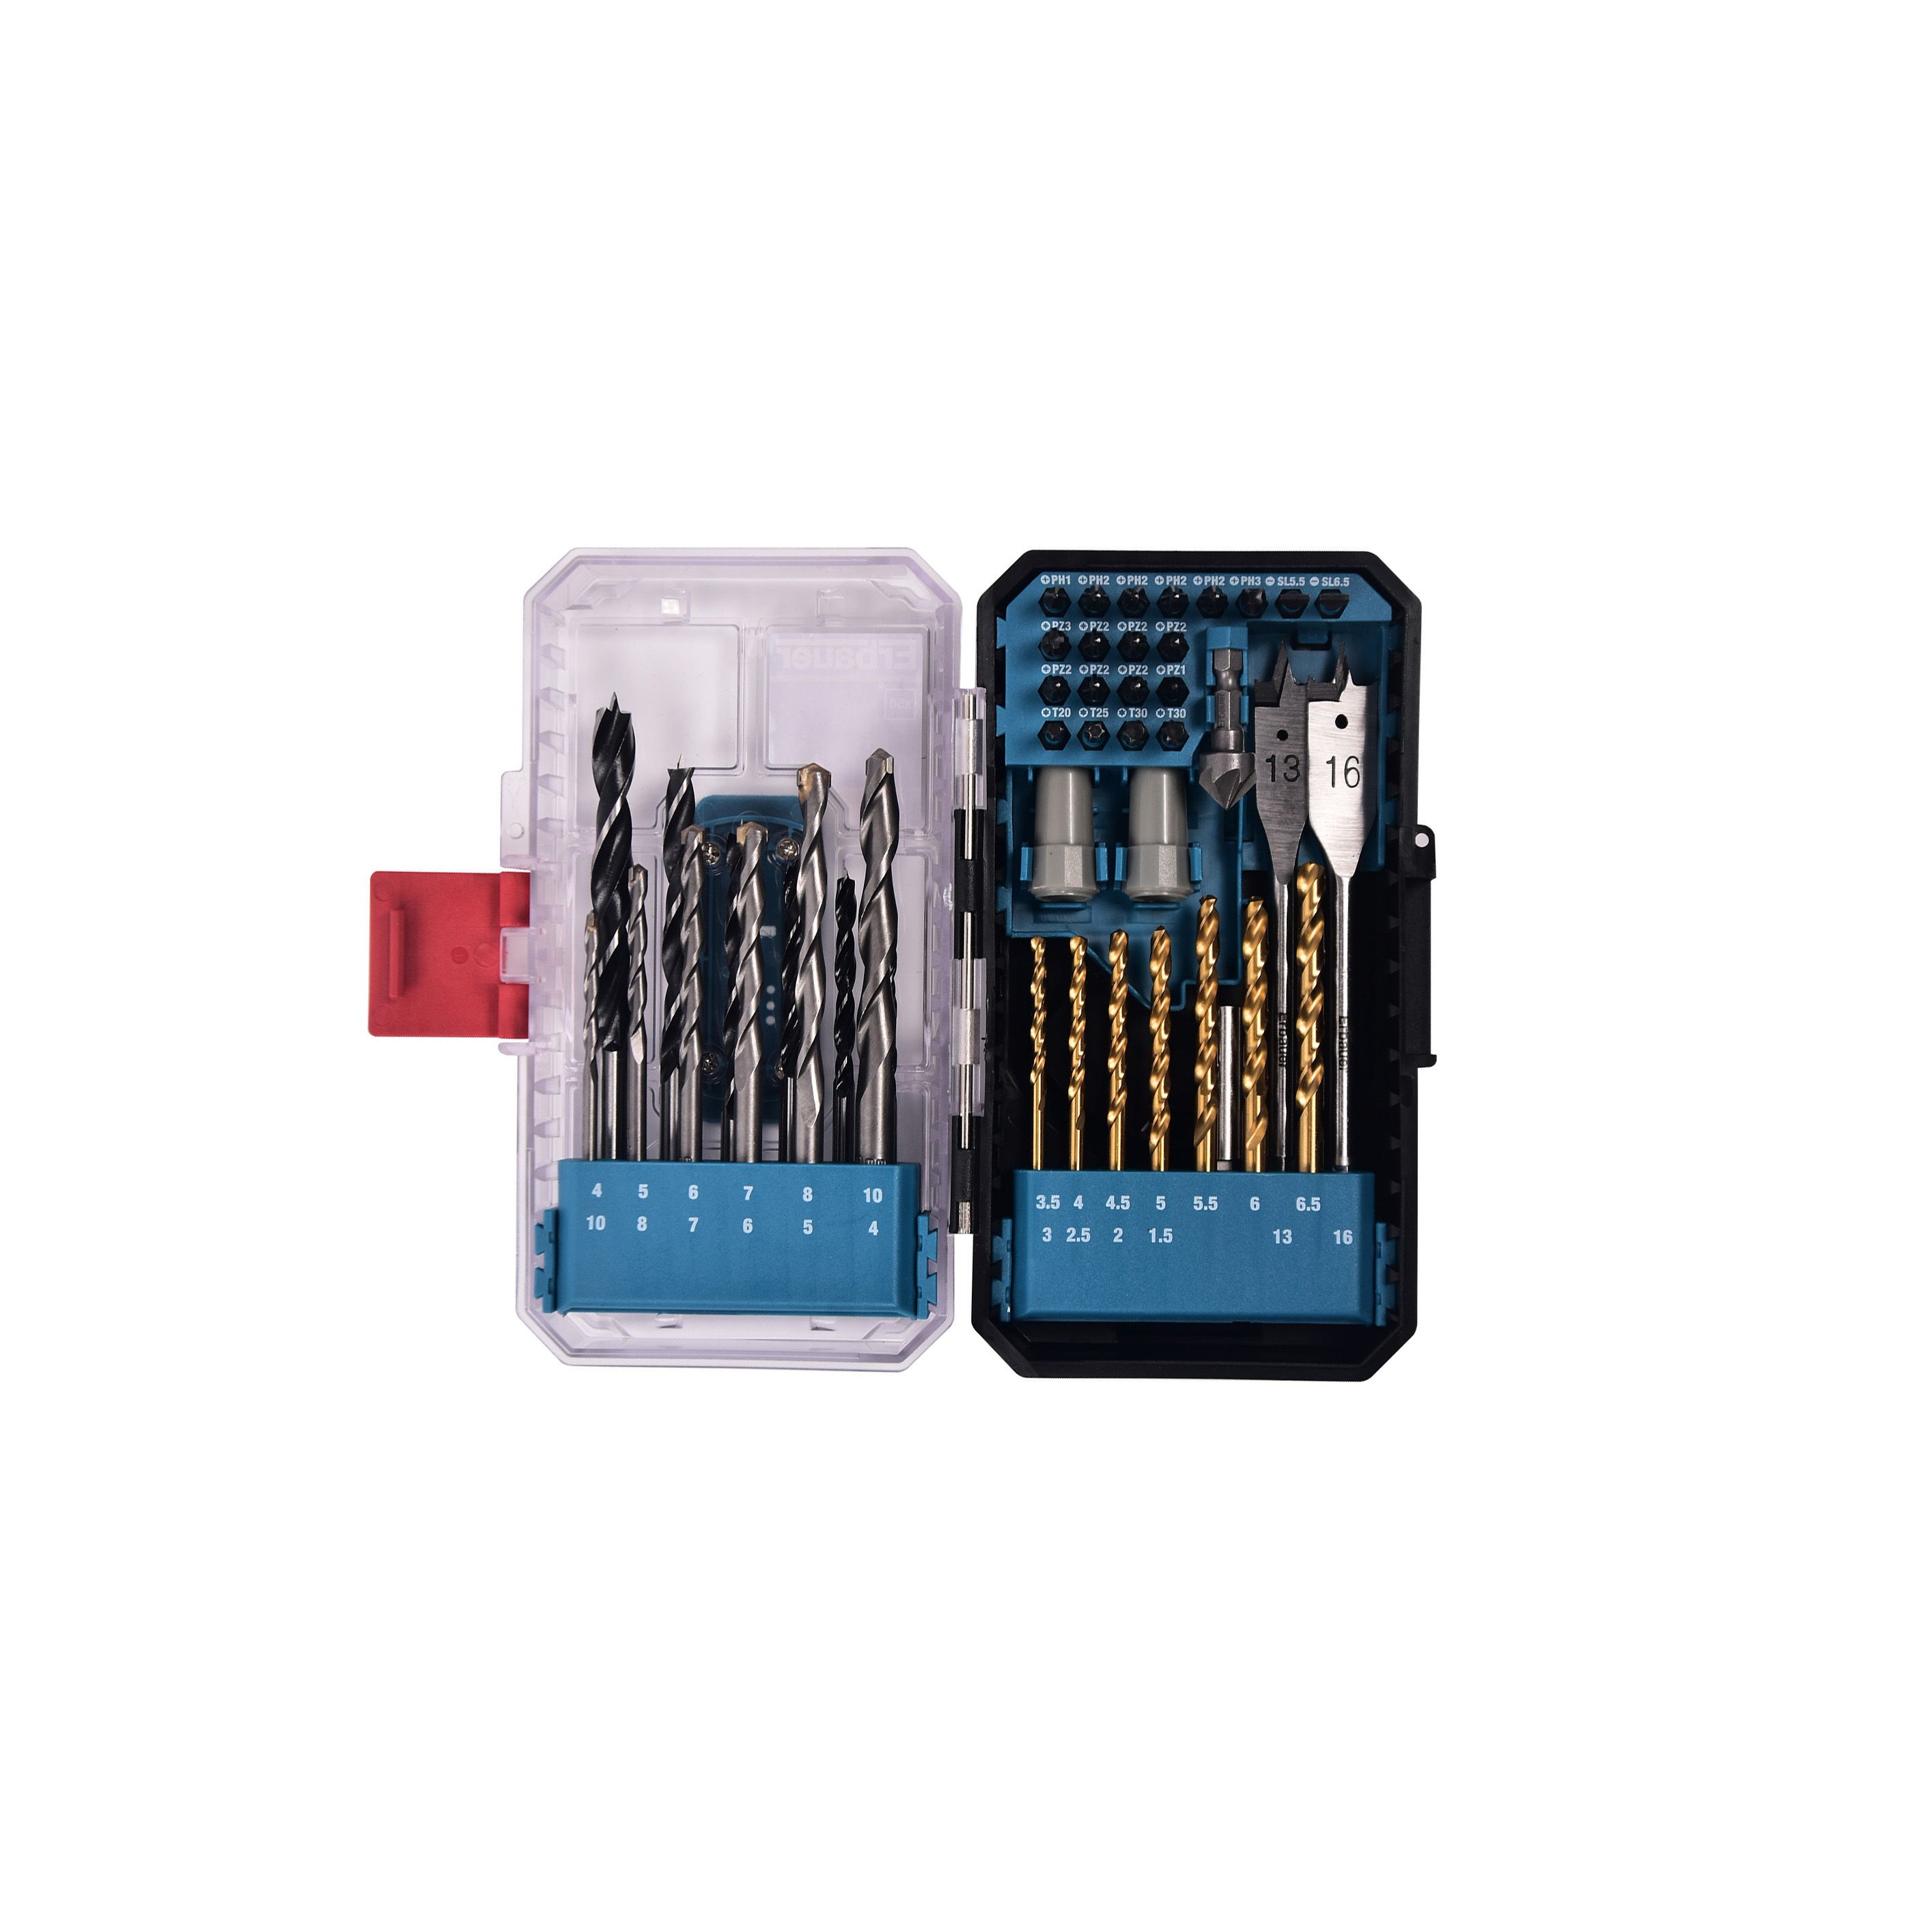 are erbauer drill bits any good? 2